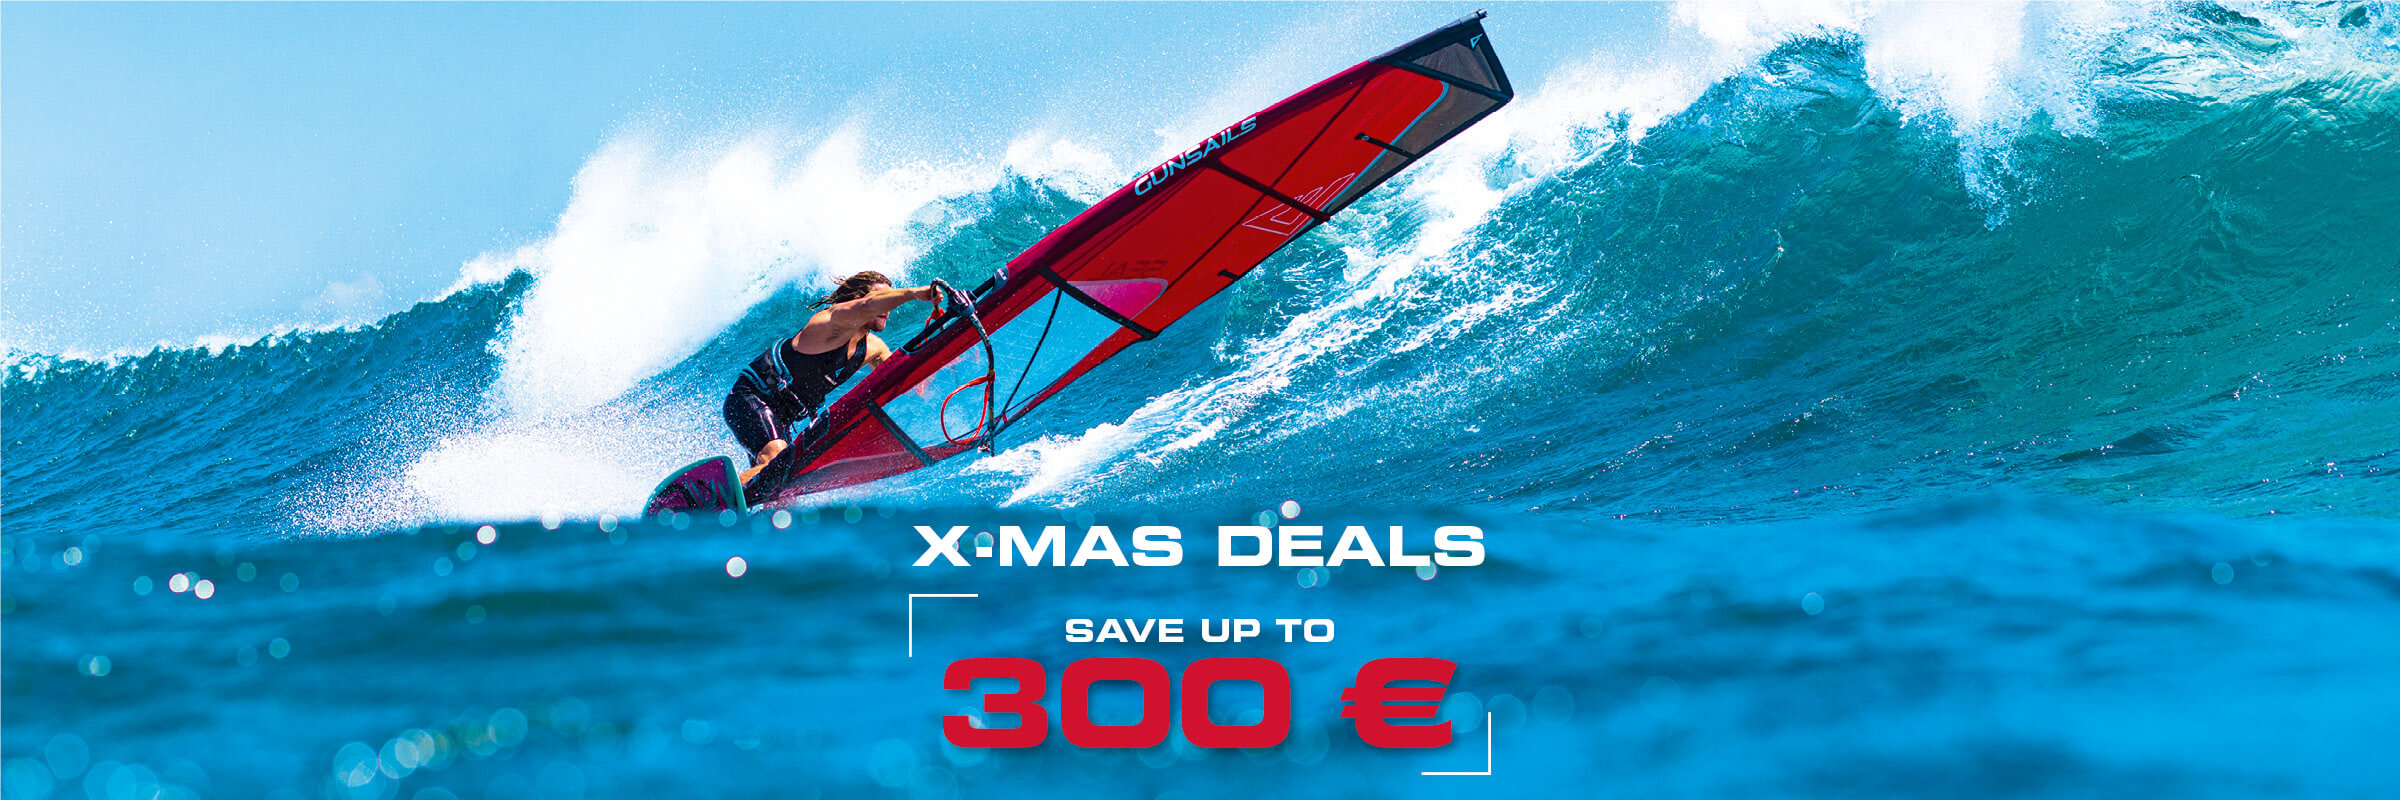 Save up to 300 Euro